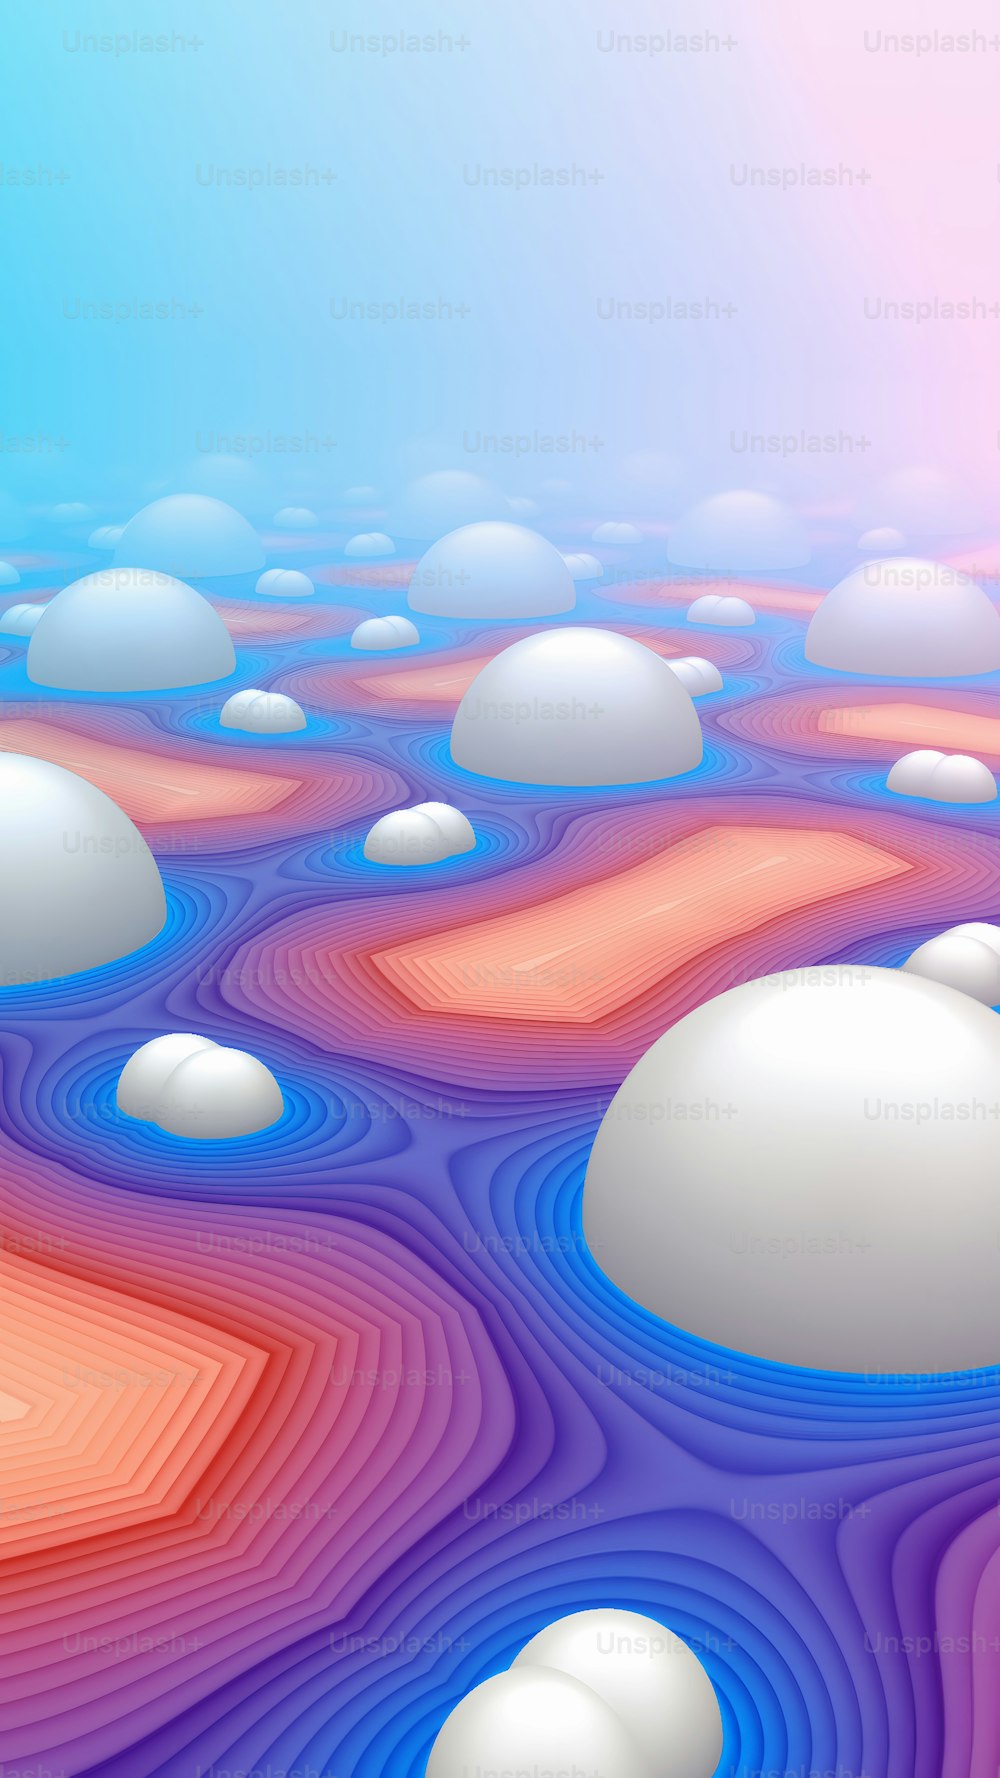 a computer generated image of a colorful landscape